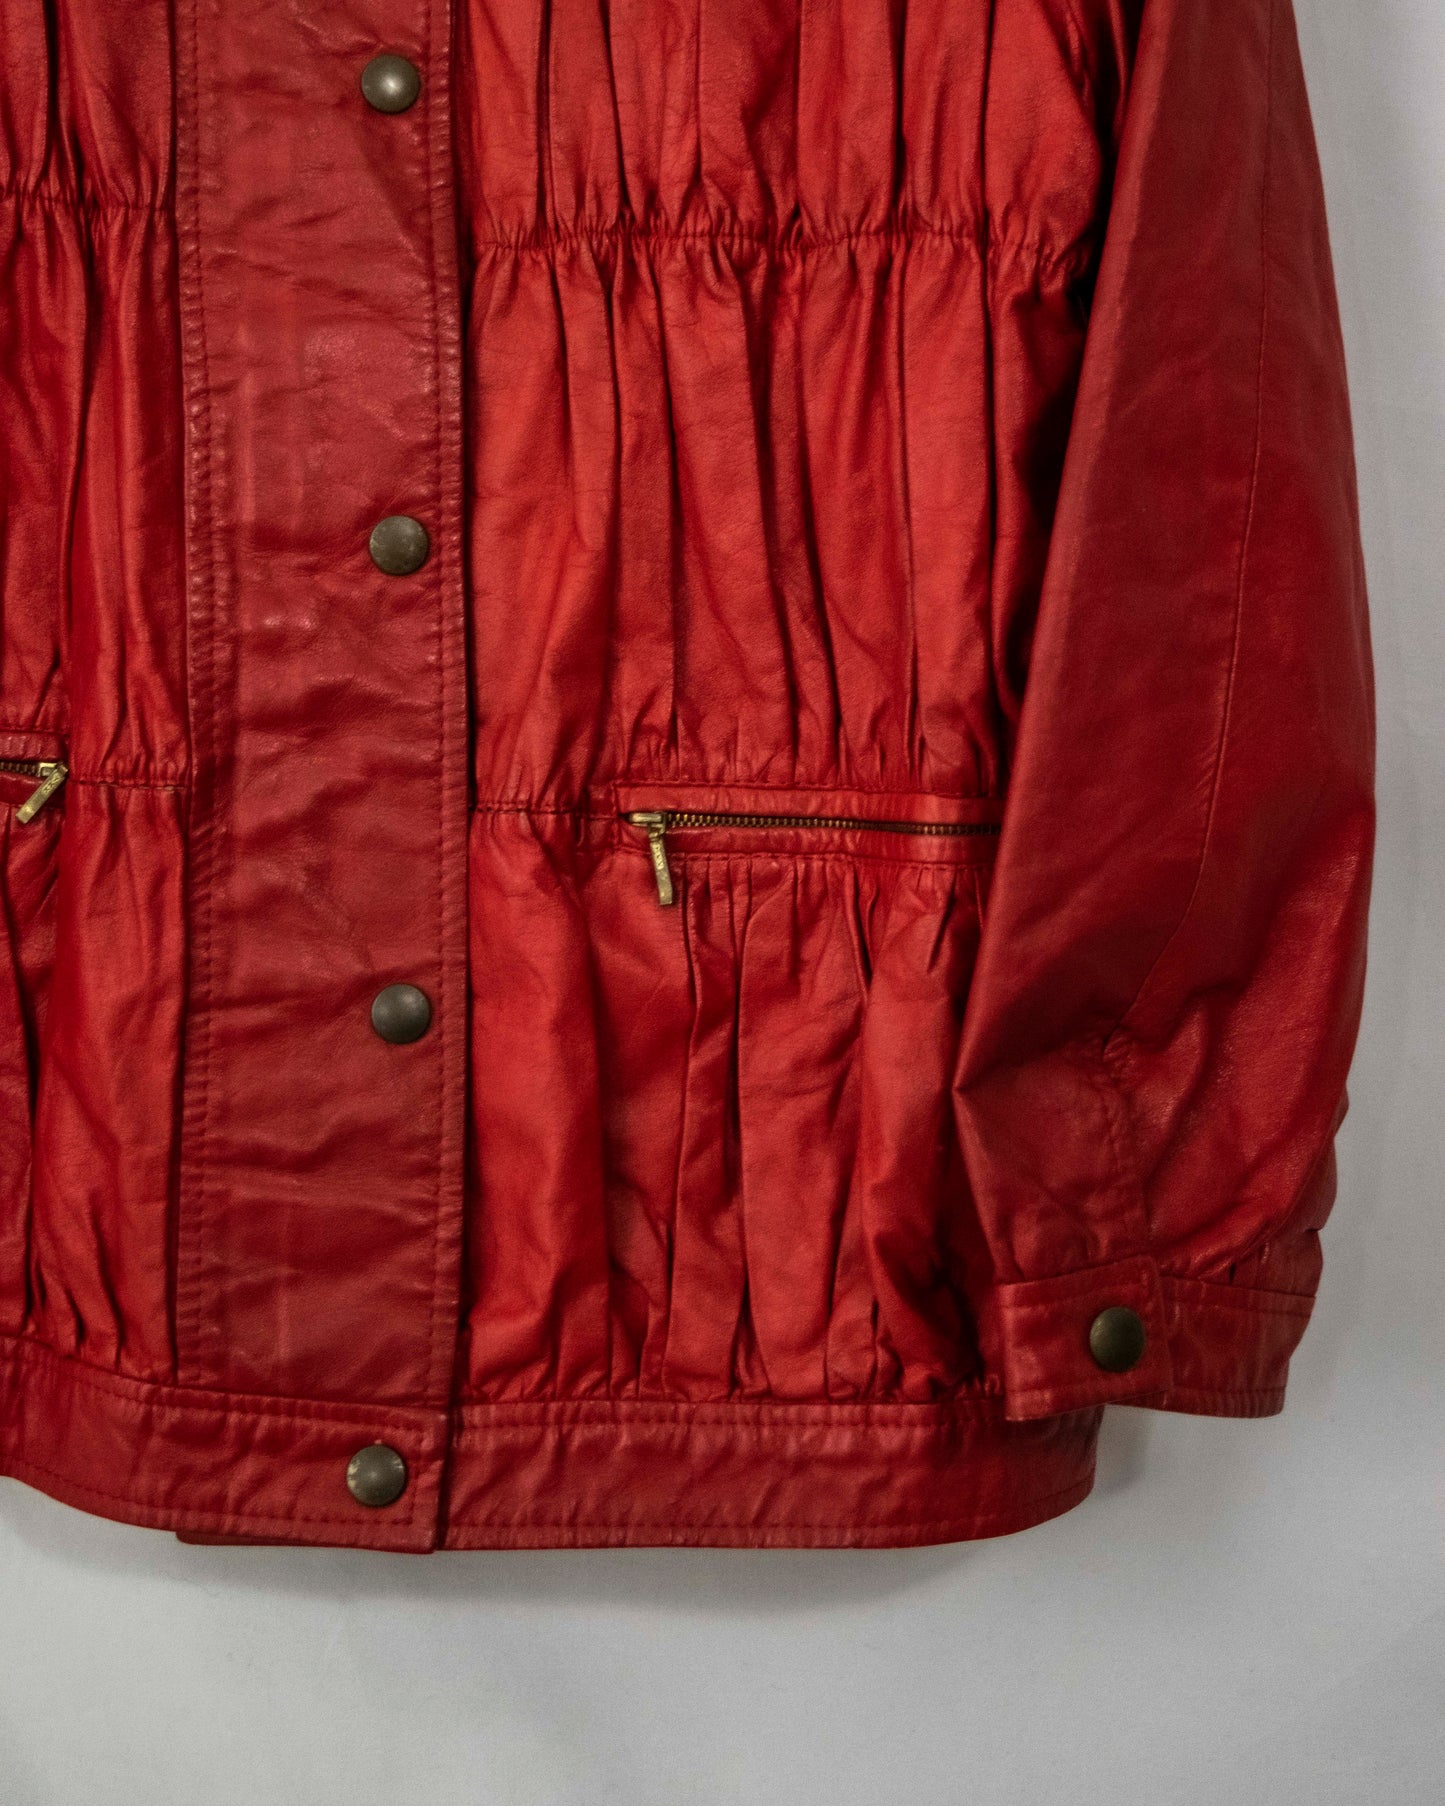 RUGGED RED LEATHER JACKET